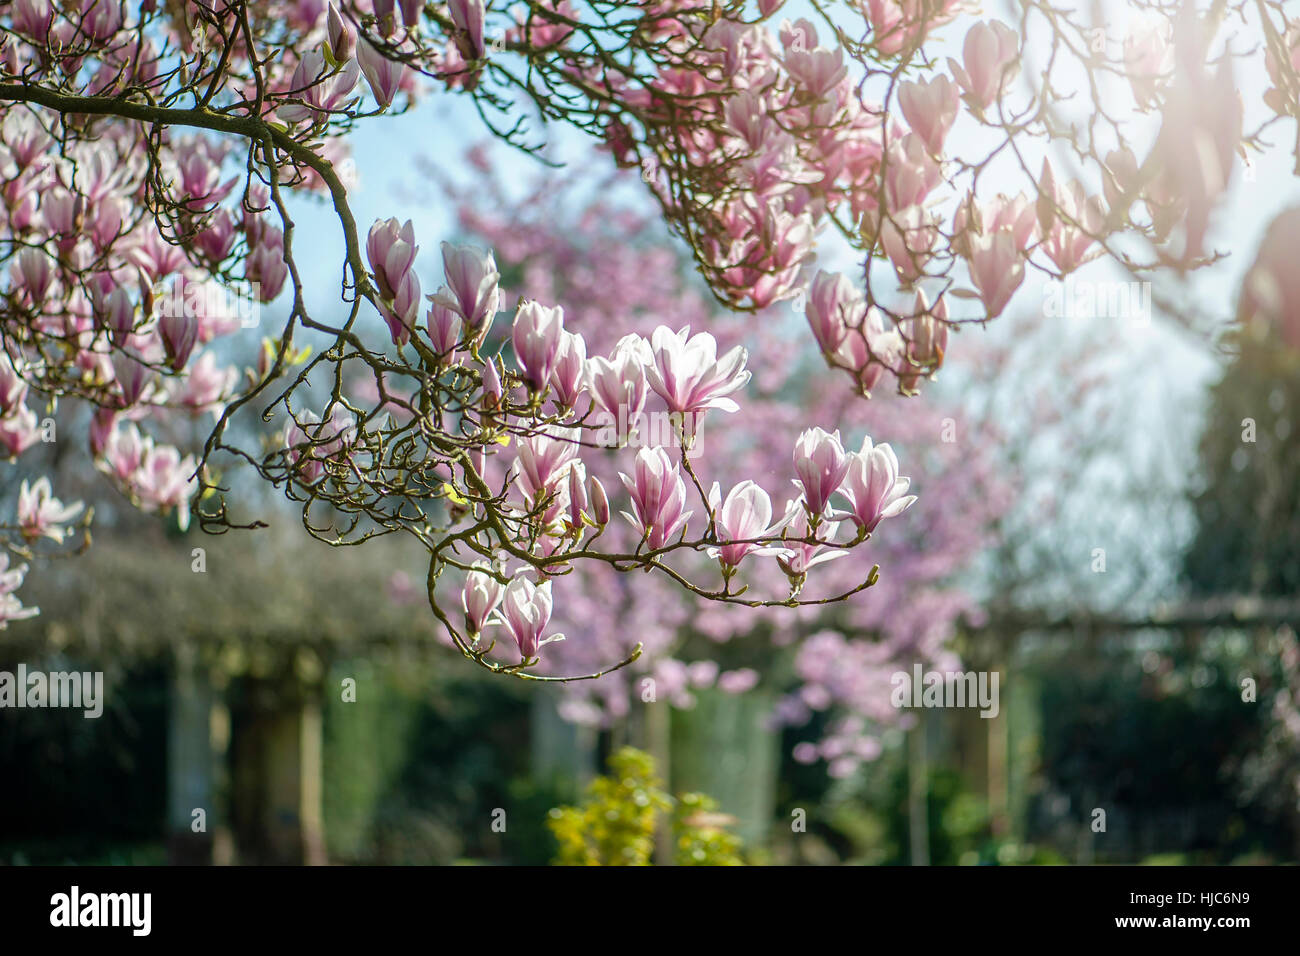 landscape image of the beautiful spring flowering Magnolia tree/shrub pink, goblet-shaped flowers, image taken against a blue sky and soft background. Stock Photo